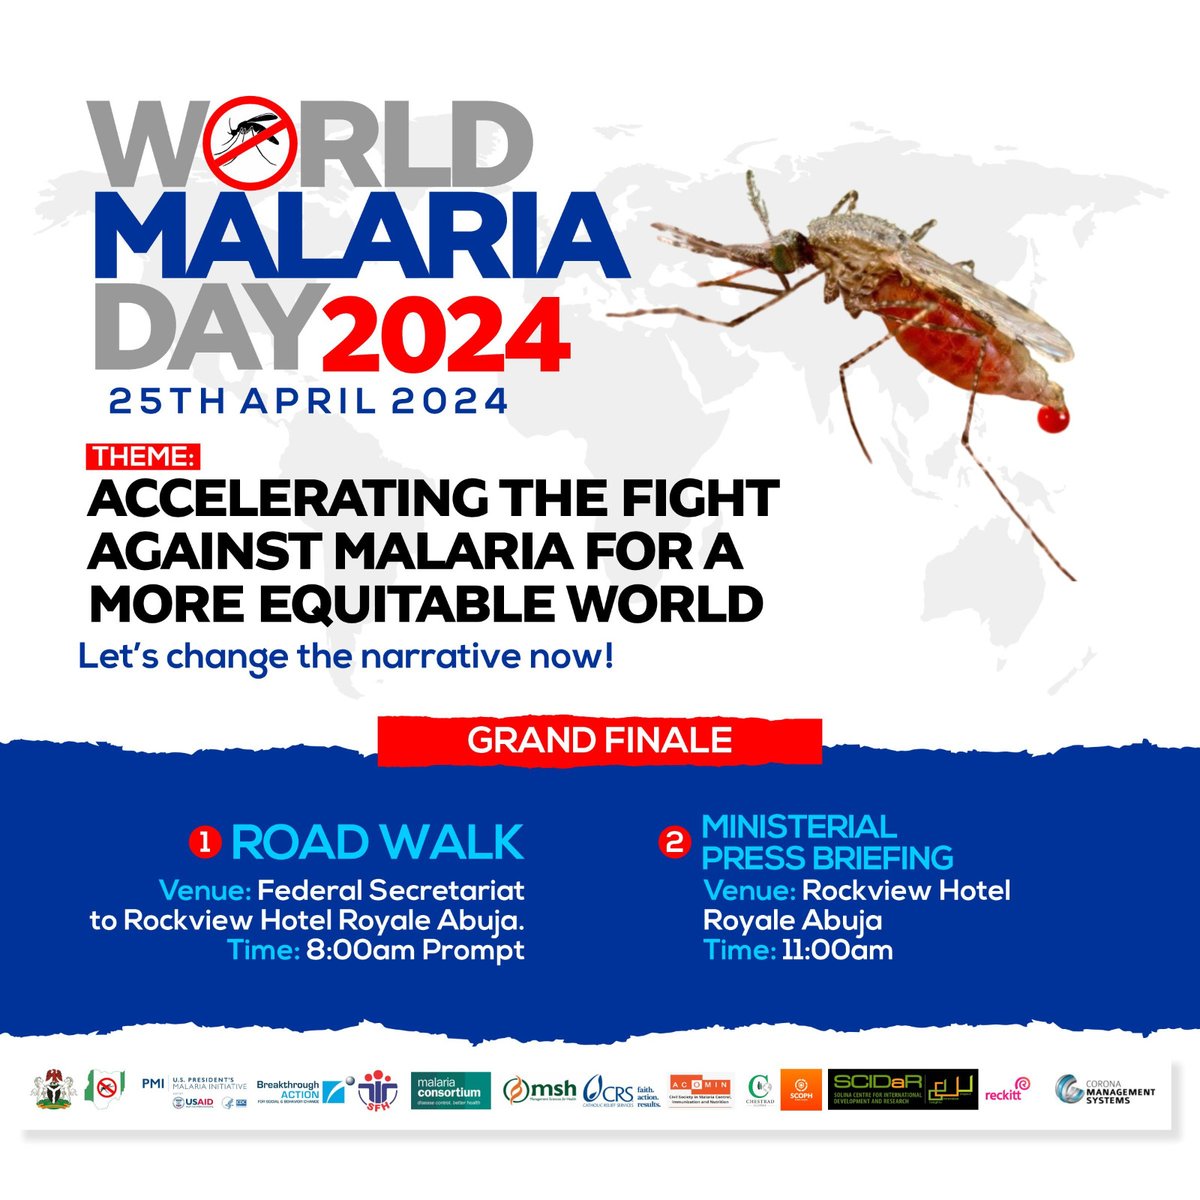 Building on the momentum of #WorldMalariaDay, a Ministerial Press Briefing will be held at the Rockview Hotel Royale Abuja by 11:00 AM WAT today via Zoom organised by the World Malaria Day Planning Committee and chaired by our team member, Gbenga Jokodola. This briefing follows…